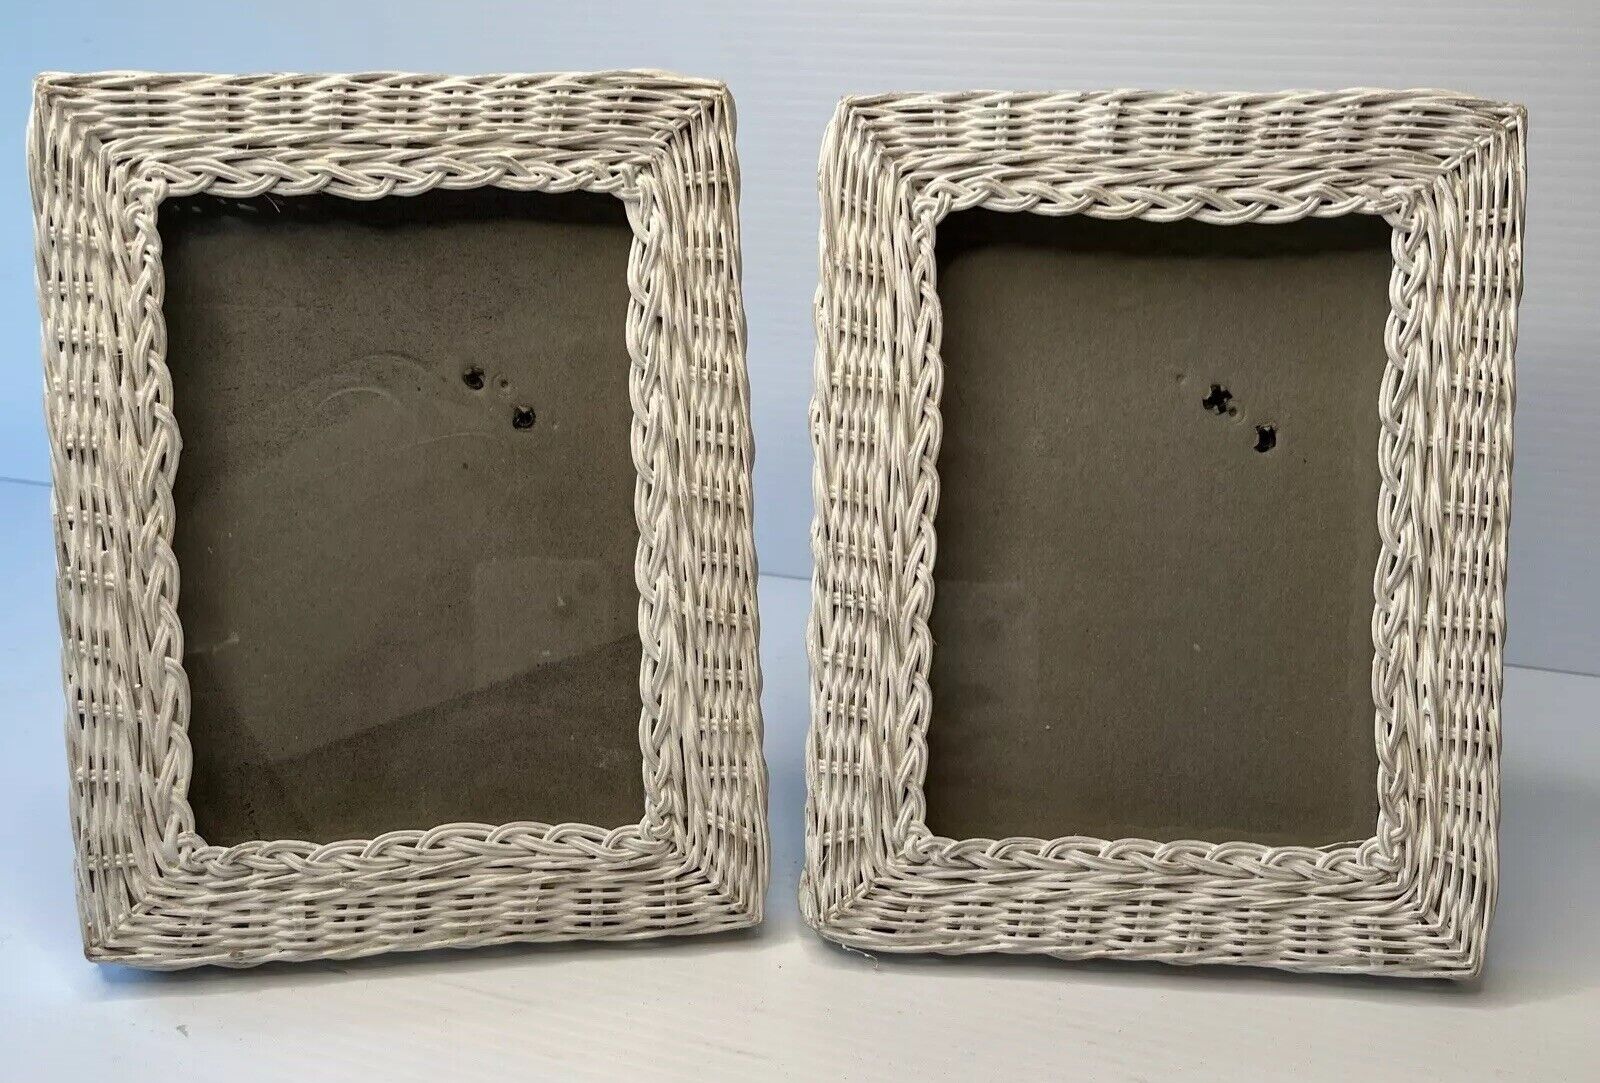 Vintage White Wicker Picture Frames Boho Cottagecore 5x7 inches Set Of 2